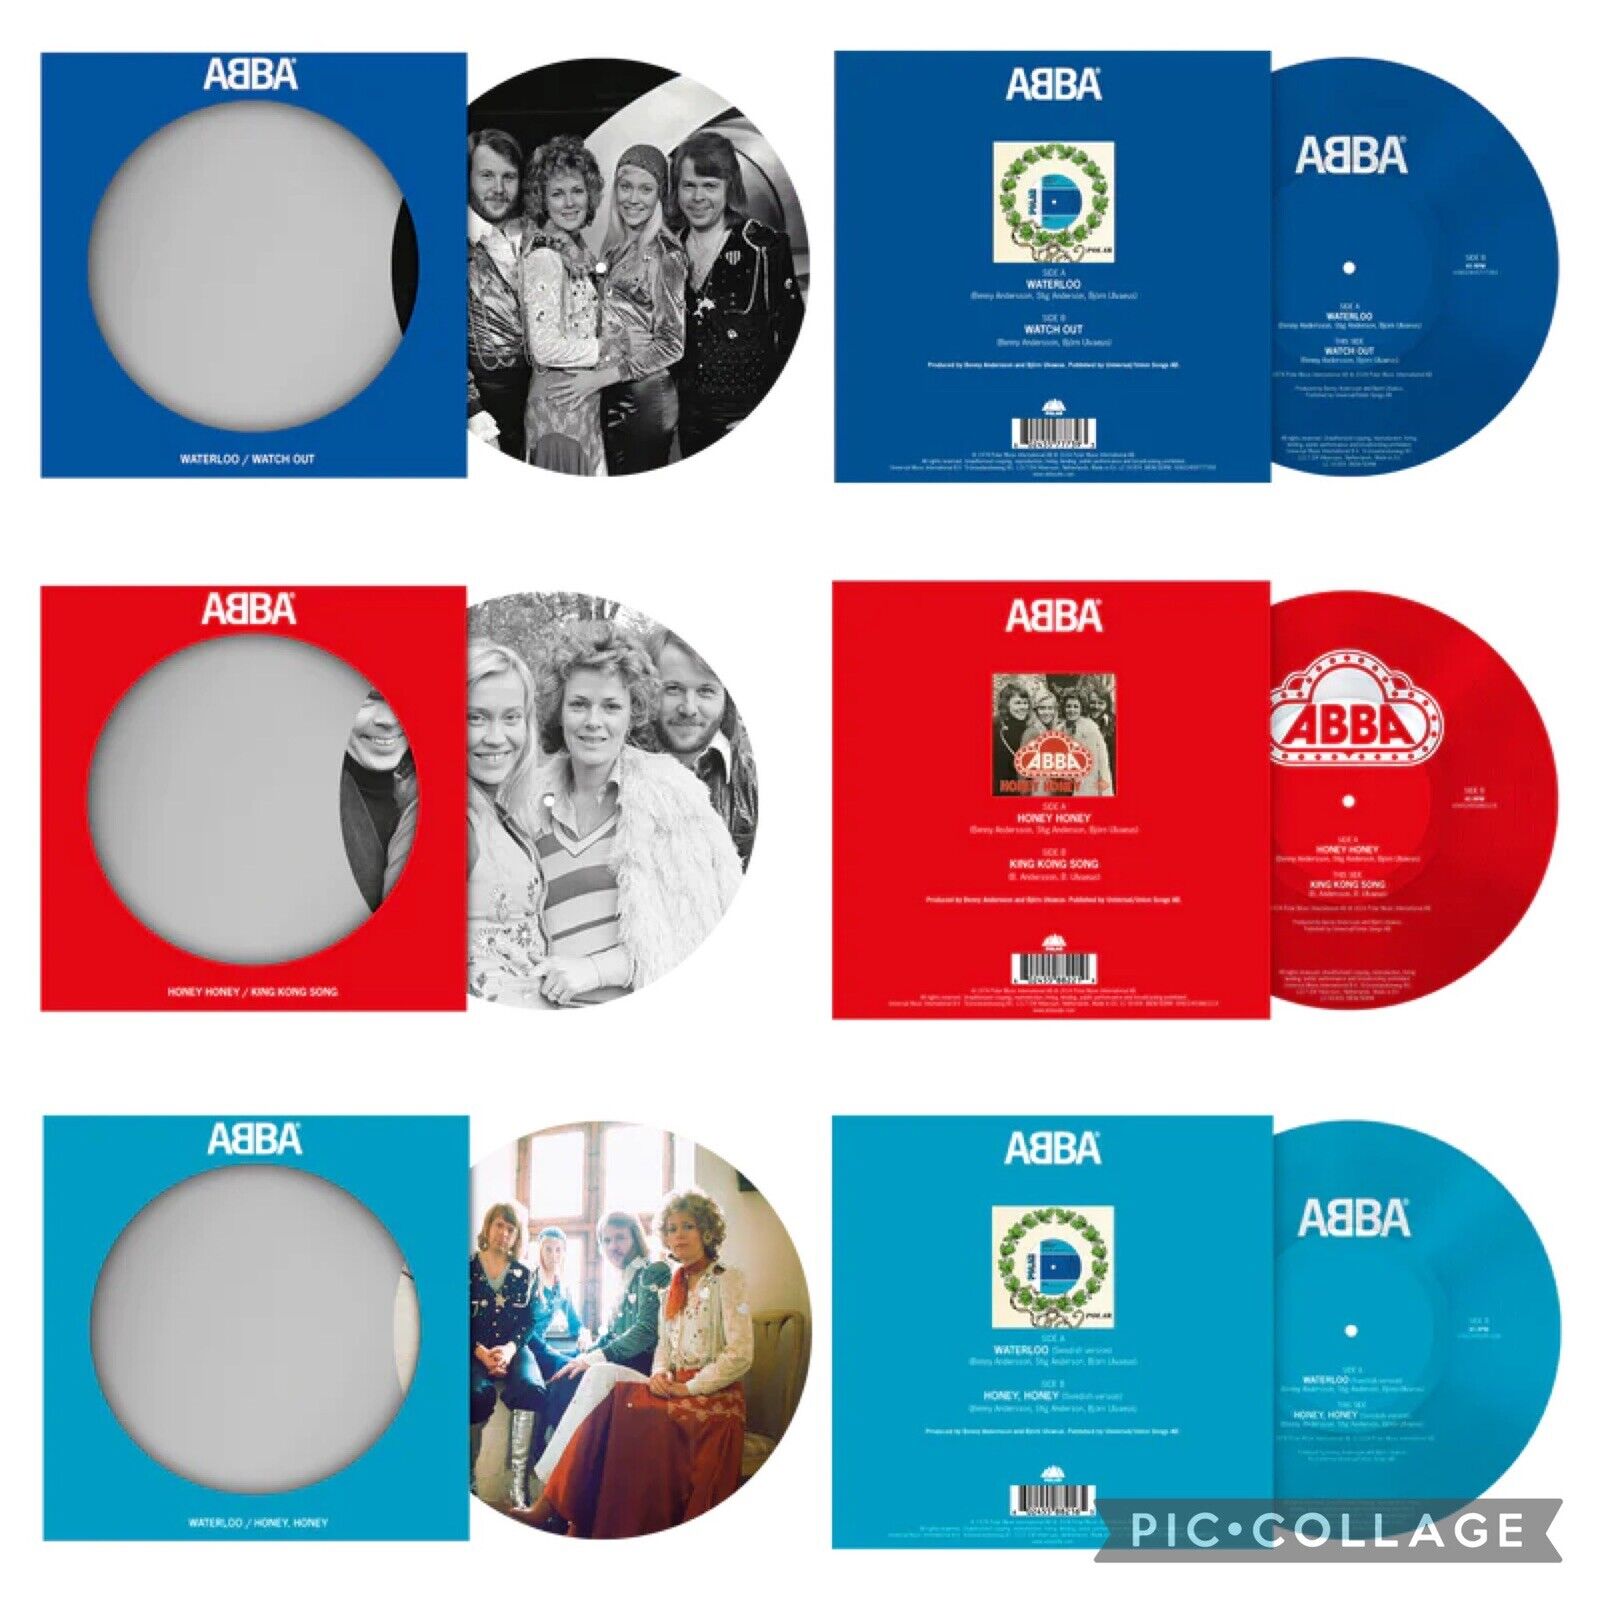 Abba - 3 x 7" Vinyl Singles - Honey Honey, Waterloo & Watch Out - Picture Disc